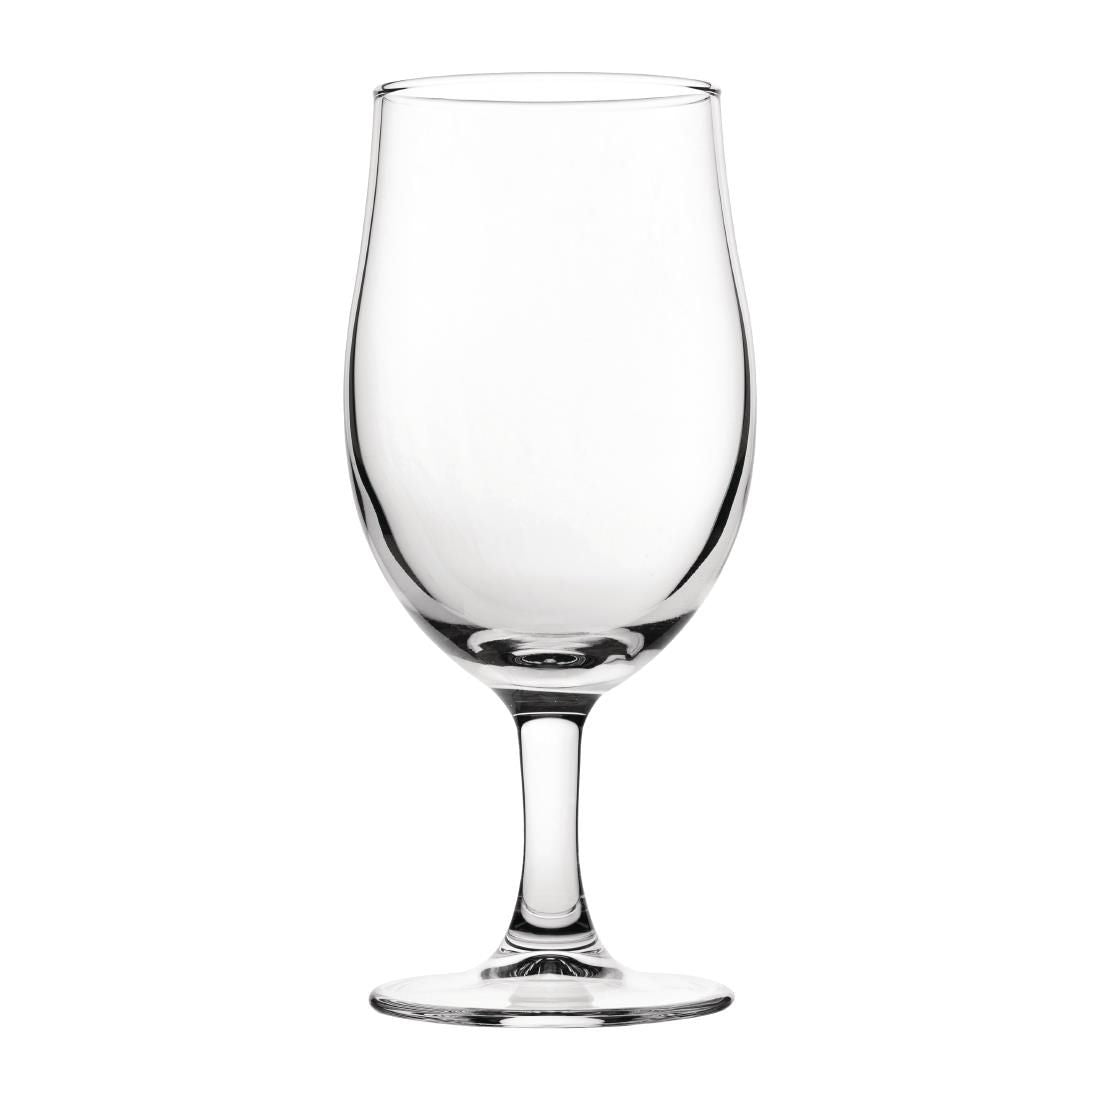 CY328 Utopia Nucleated Toughened Draught Beer Glasses 280ml CE Marked (Pack of 12) JD Catering Equipment Solutions Ltd